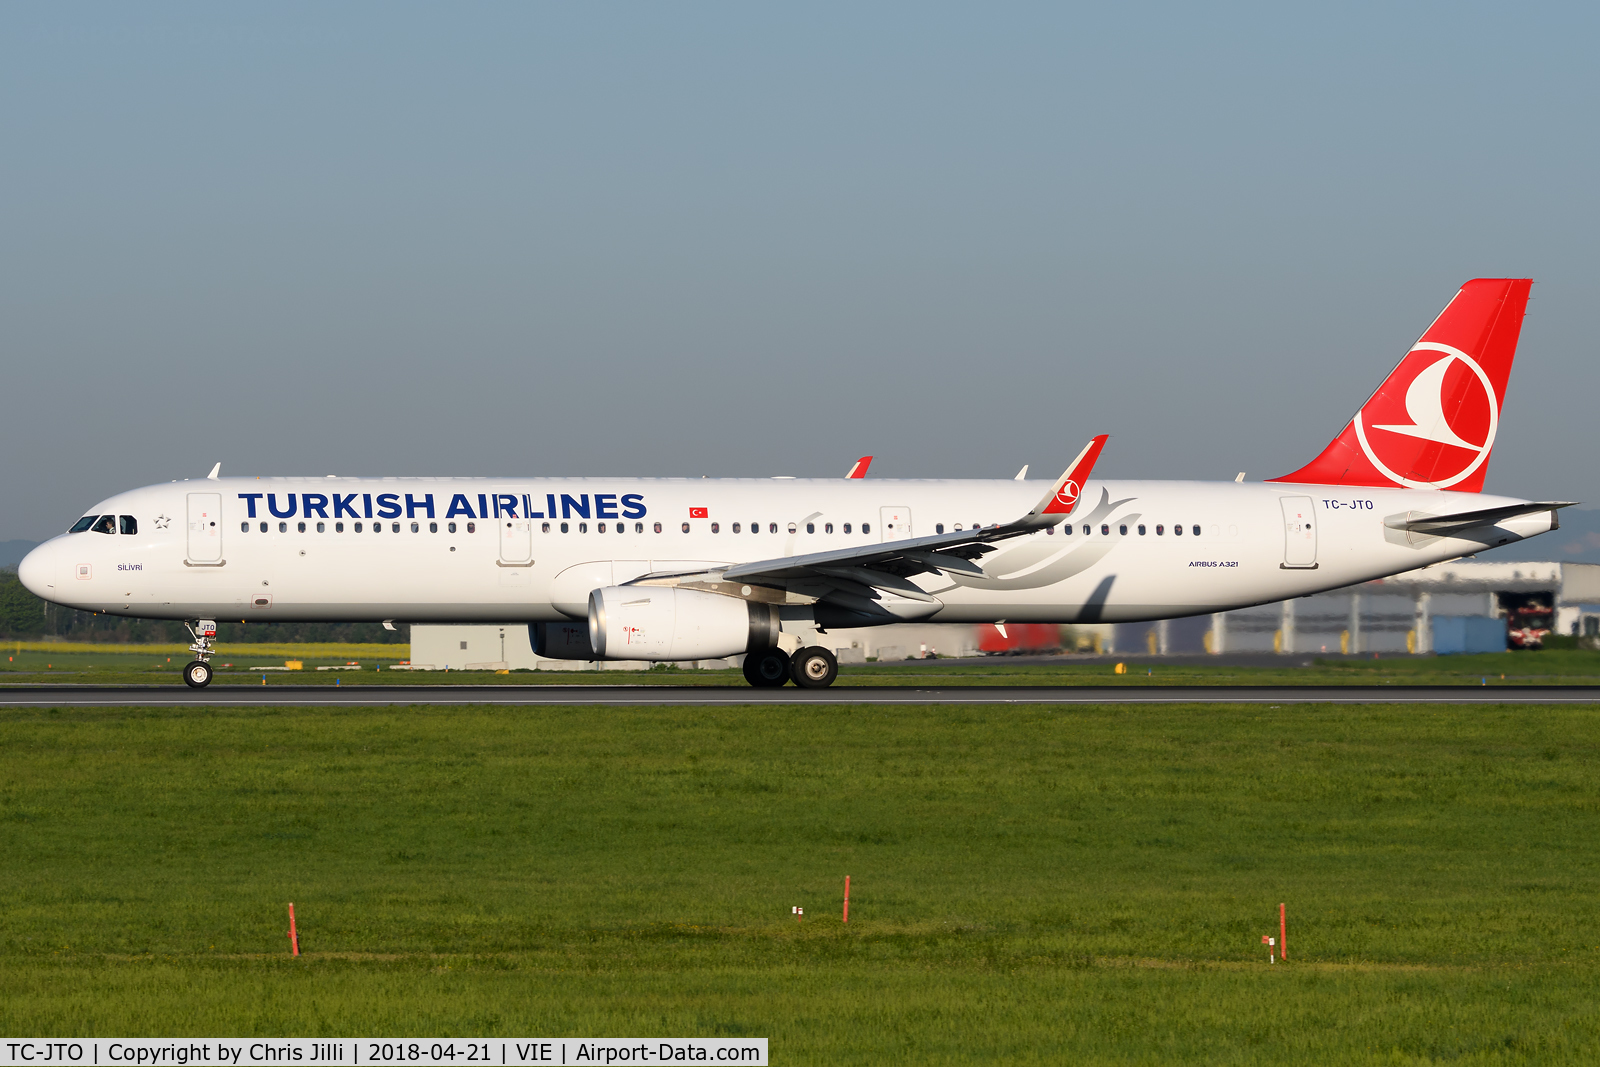 TC-JTO, 2016 Airbus A321-231 C/N 7299, Turkish Airlines